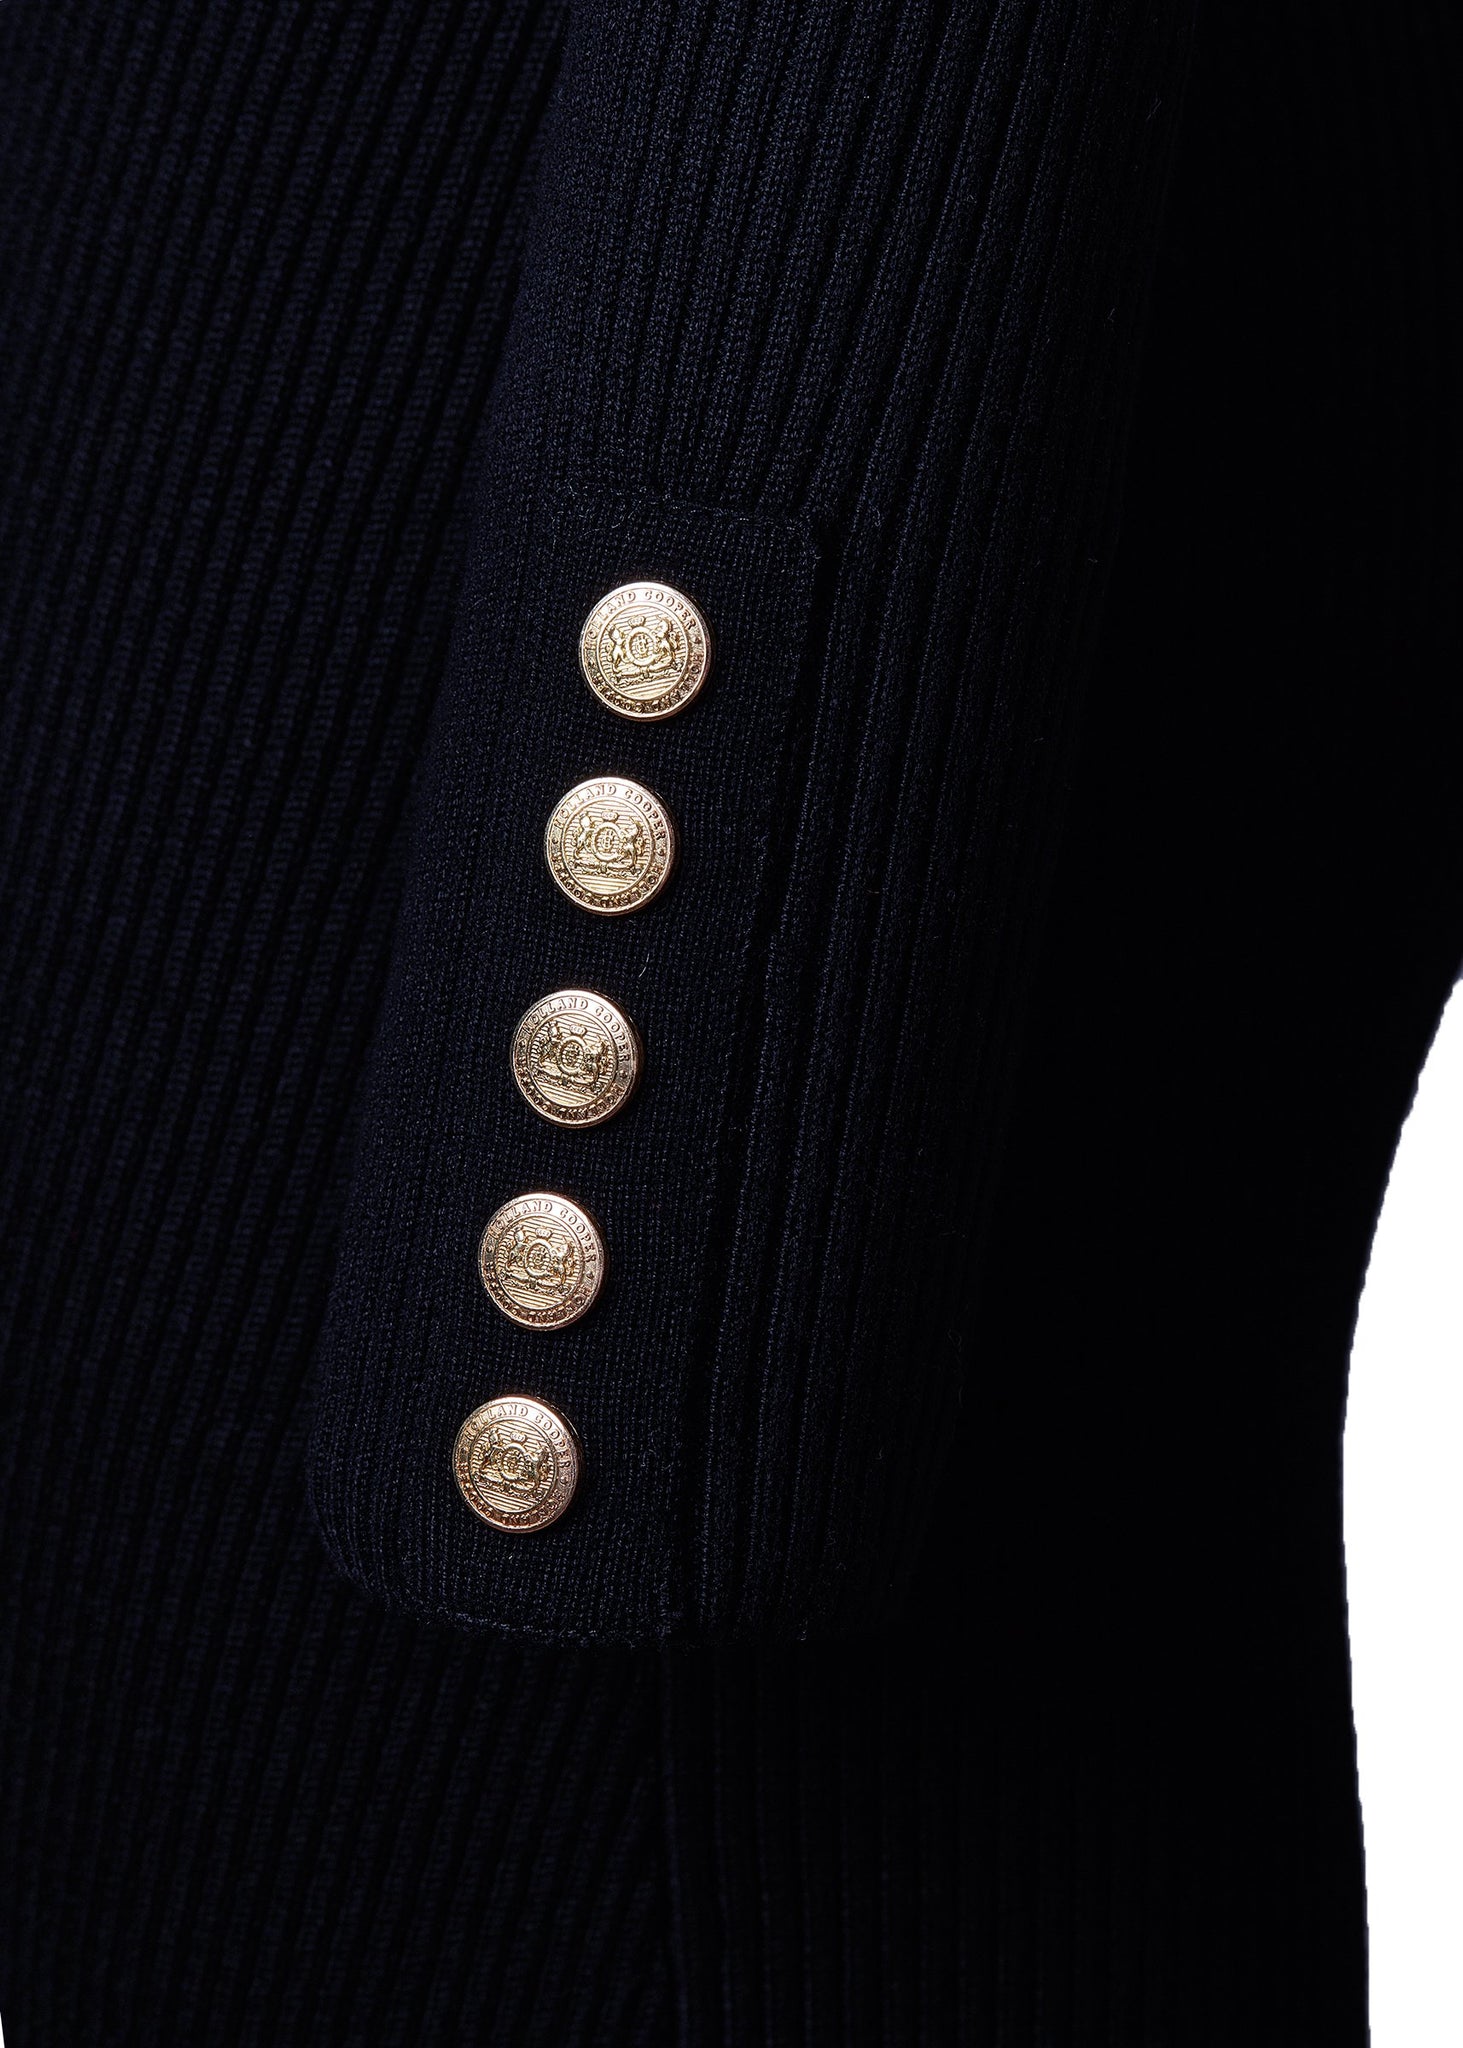 gold button cuff detail of womens body-contouring navy knitted midi dress with ribbed roll neck and cuffs and gold buttons on shoulders and cuffs